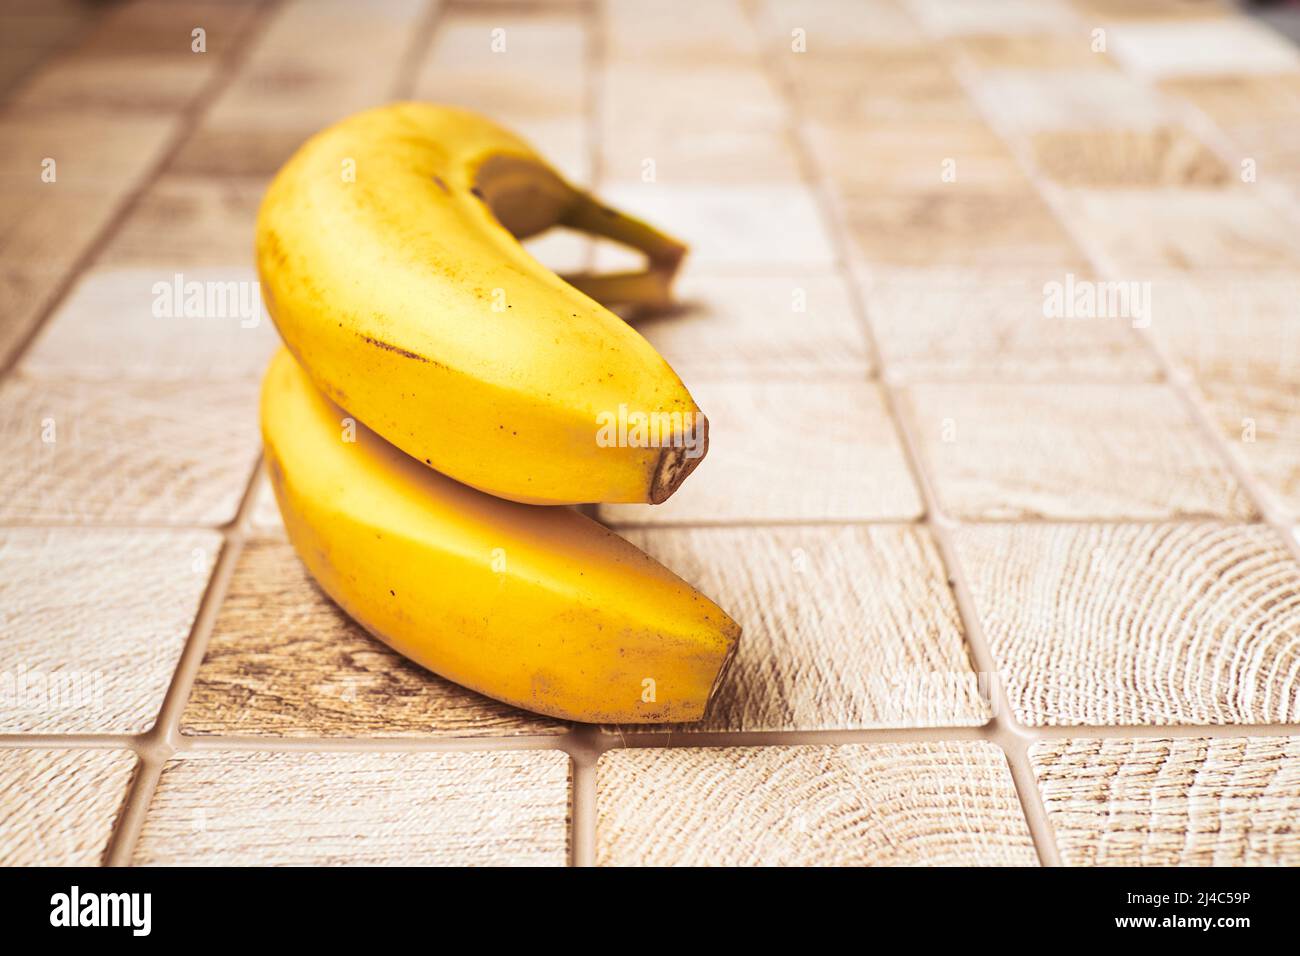 Two ripe bananas on a checkered wooden surface Stock Photo